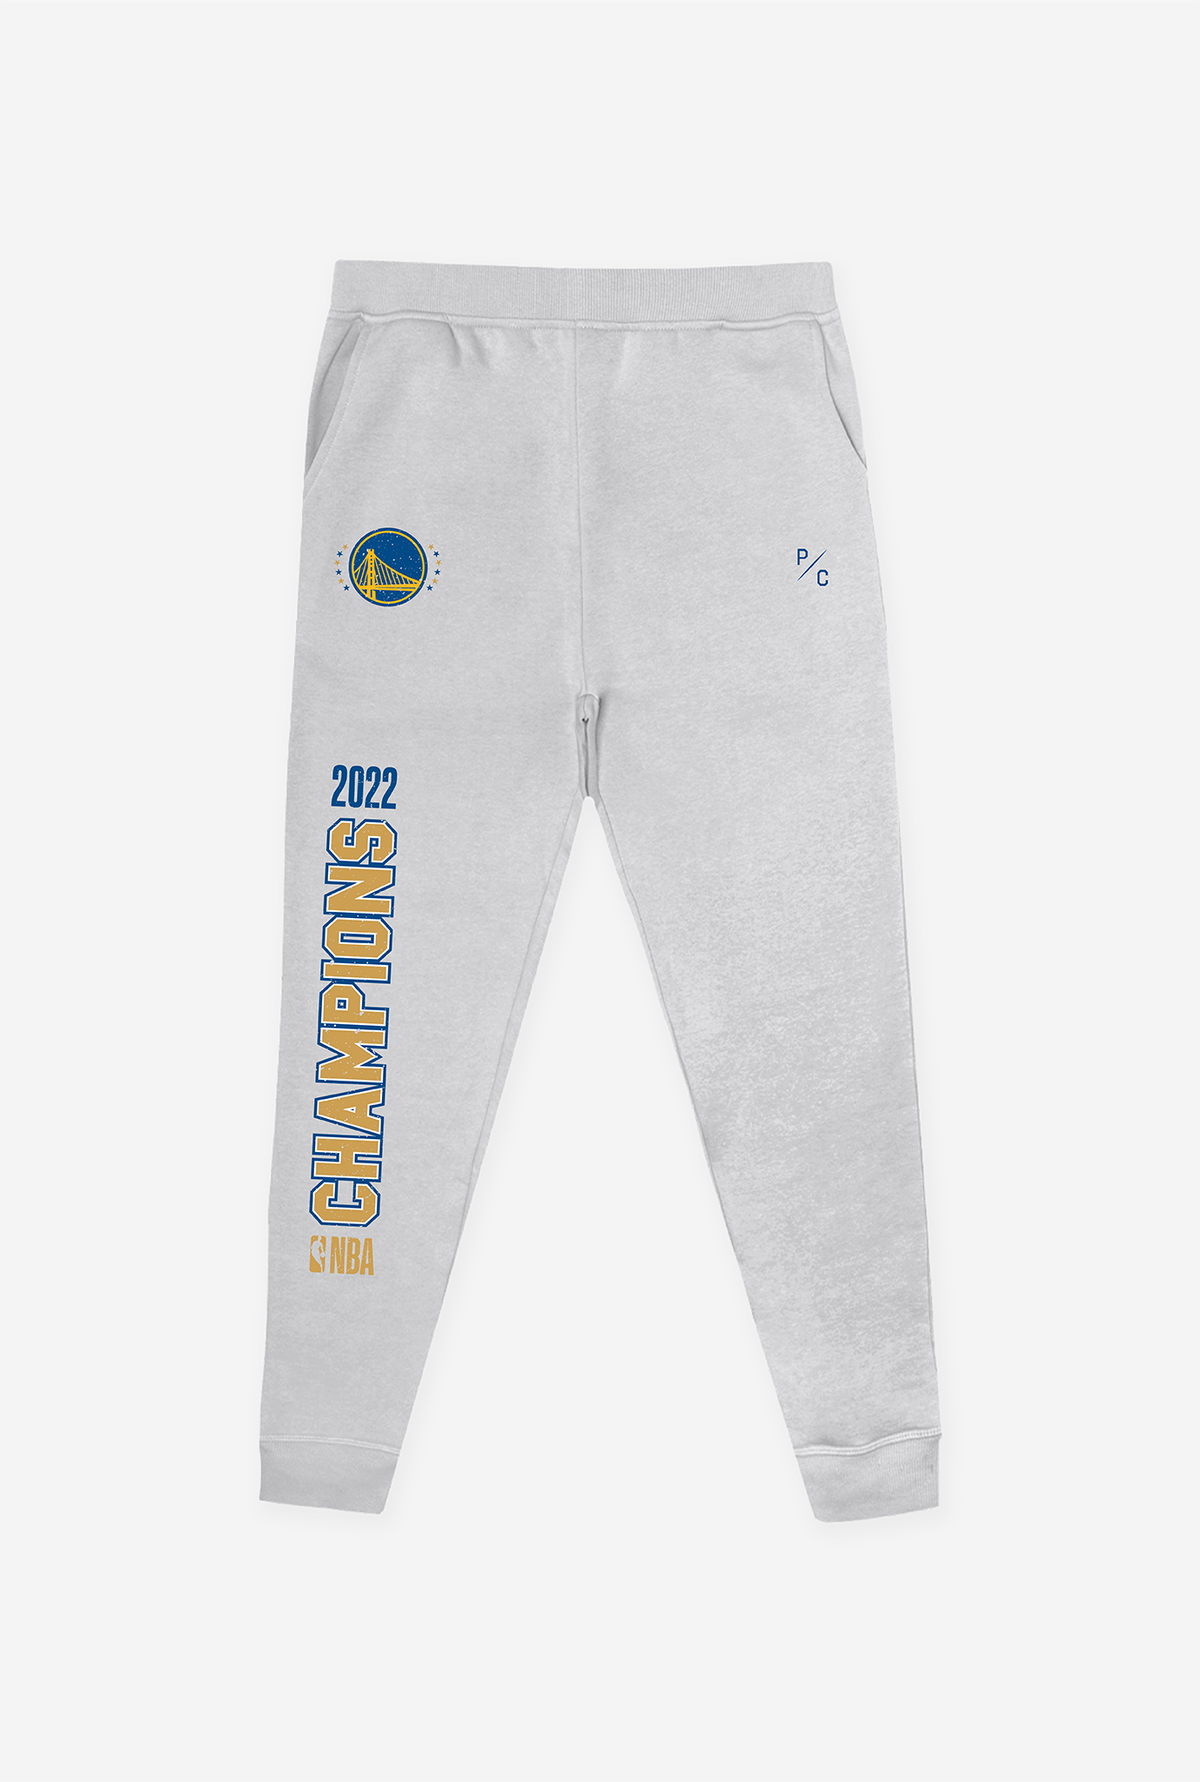 Golden State Warriors Champions '22 Joggers - Grey